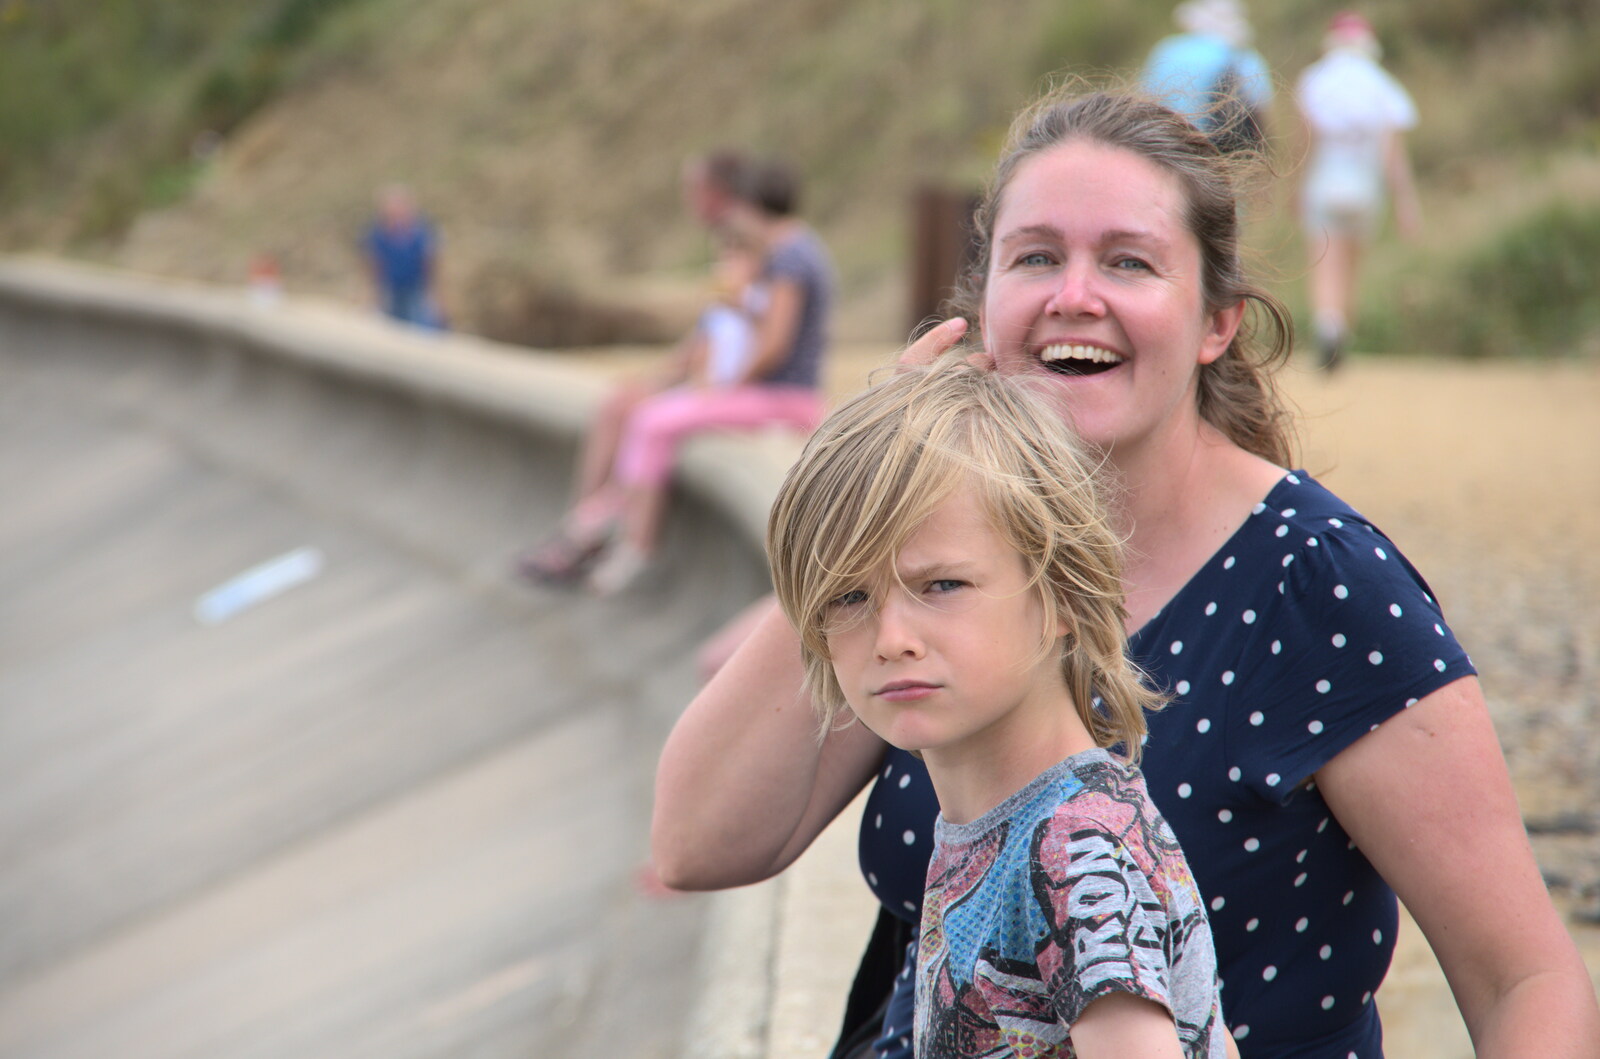 Harry and Isobel from Camping on the Coast, East Runton, North Norfolk - 25th July 2020